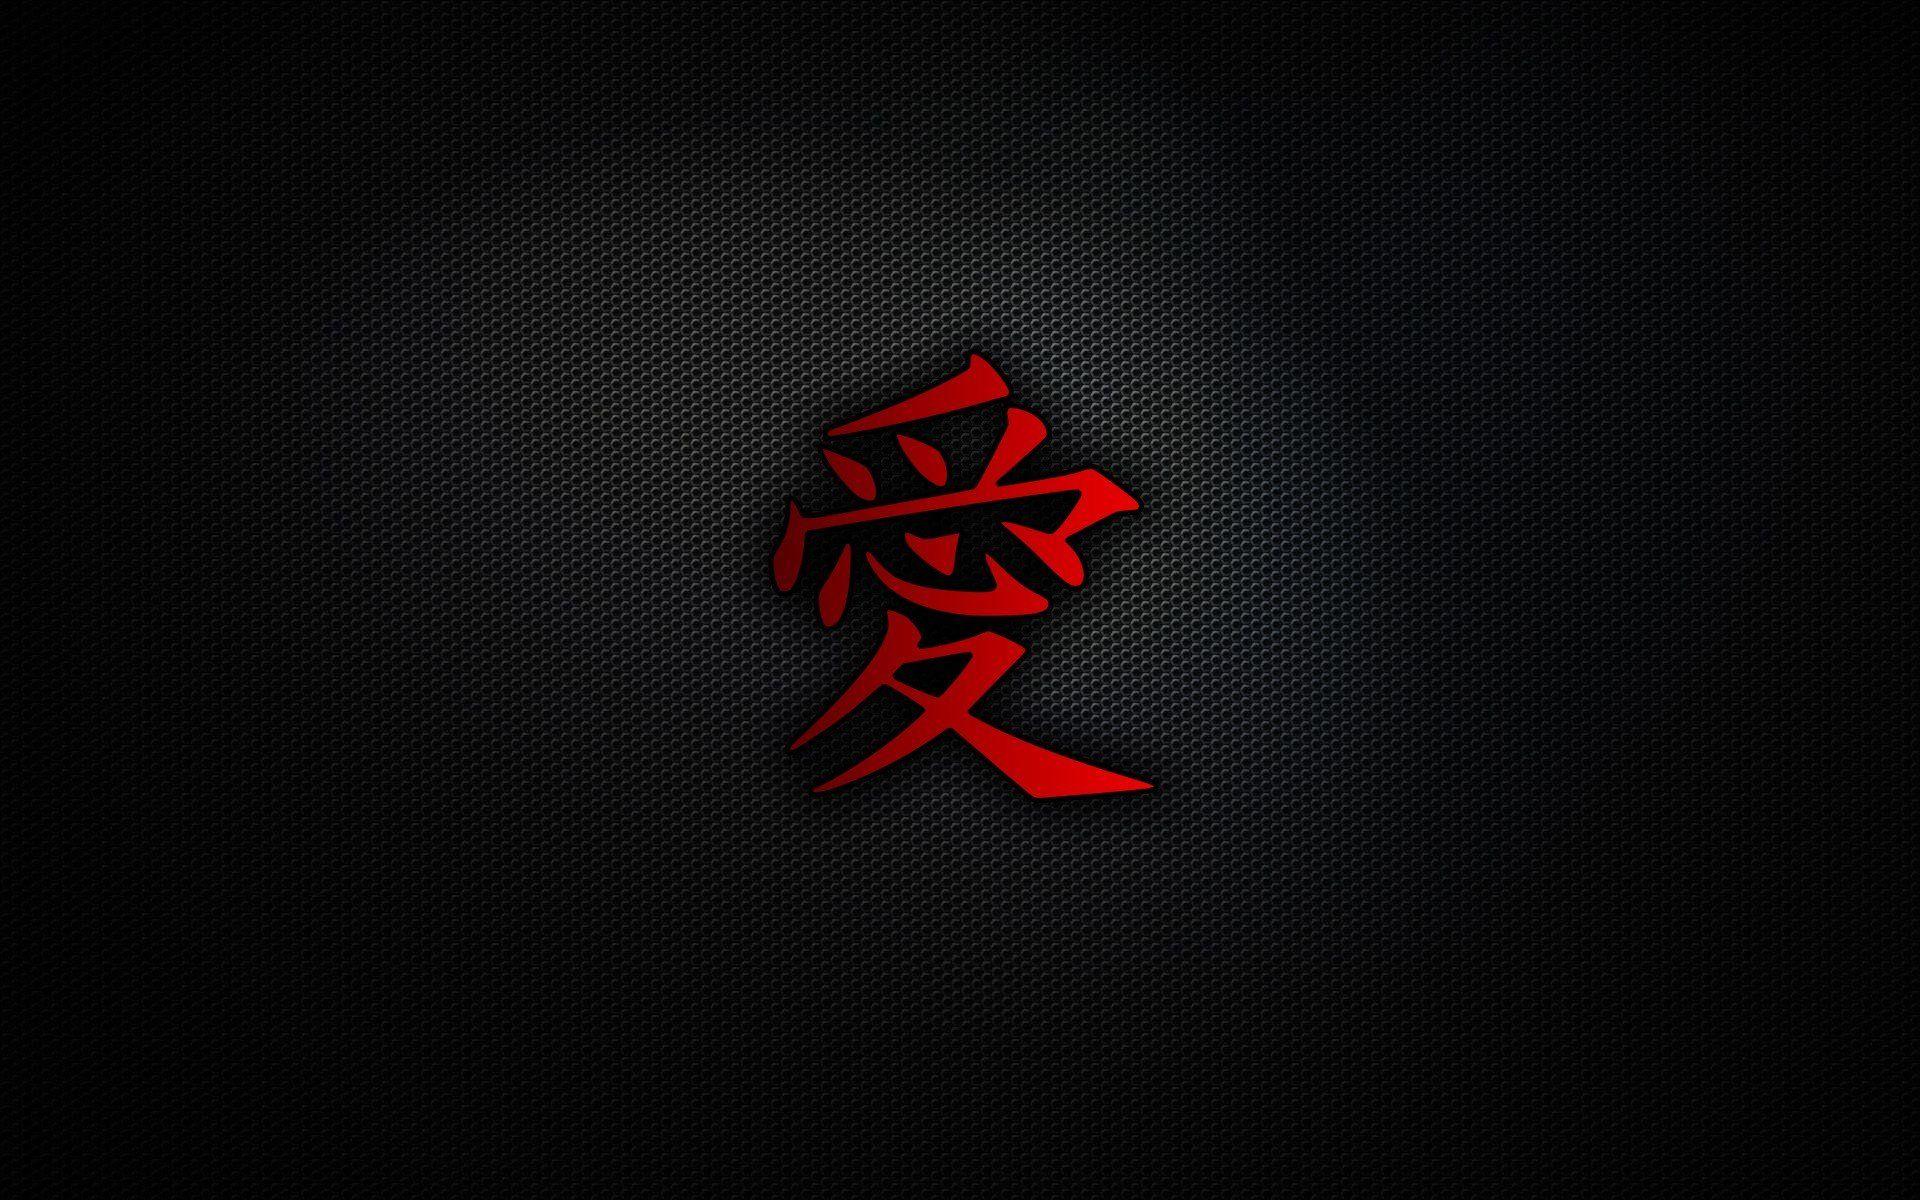 Black Chinese Logo - Image result for Chinese symbol red on black background | Formosa ...